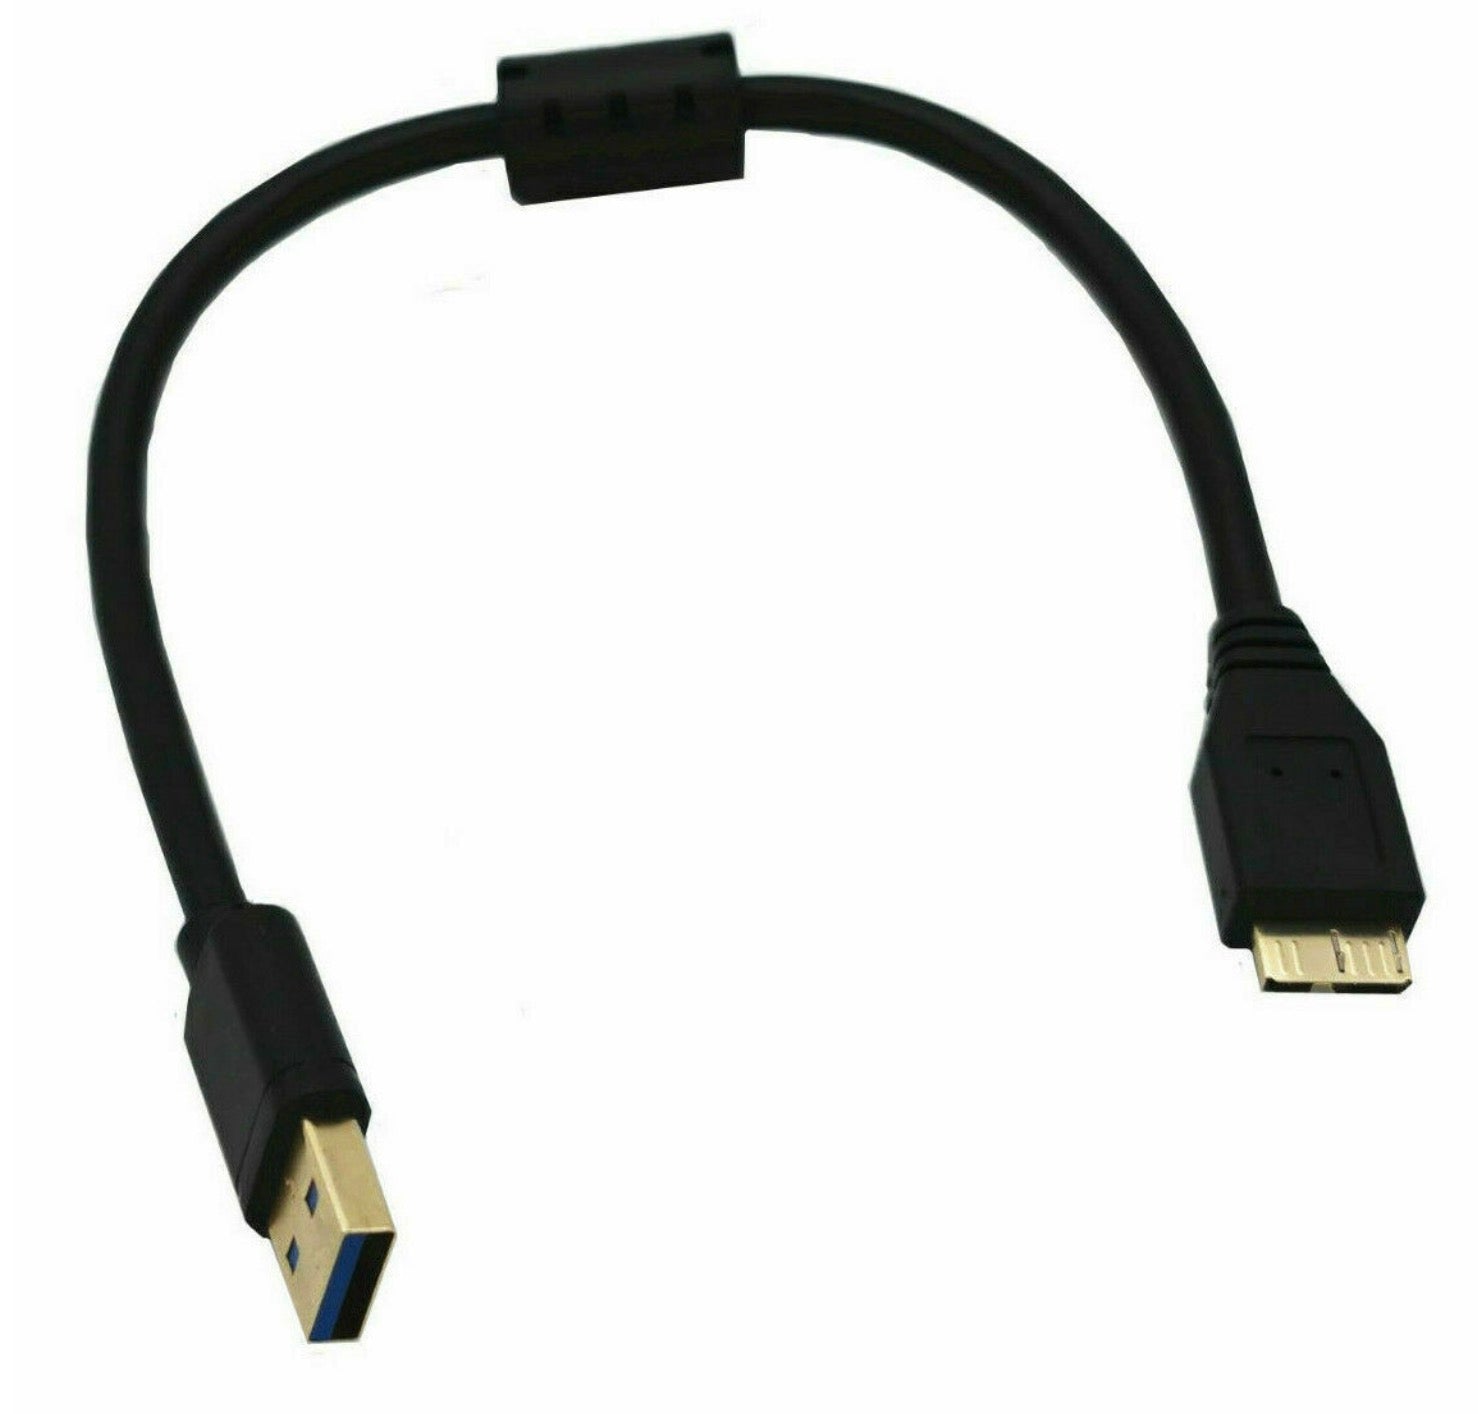 USB 3.0 Type A Male to USB 3.0 Micro-B Male Data Cable Gold Plated